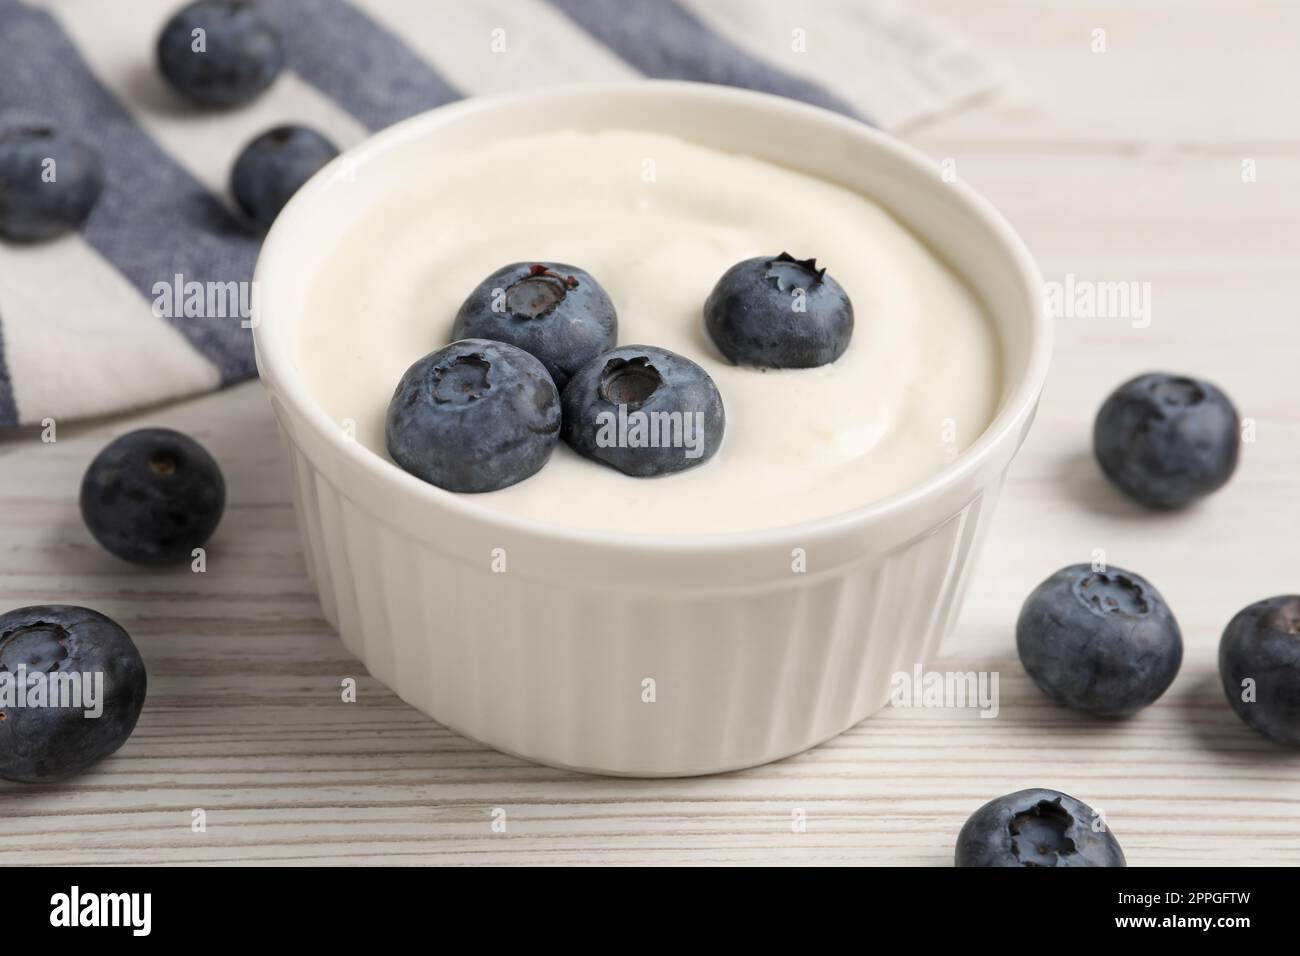 Bowl of yogurt with blueberries served on white wooden table Stock Photo